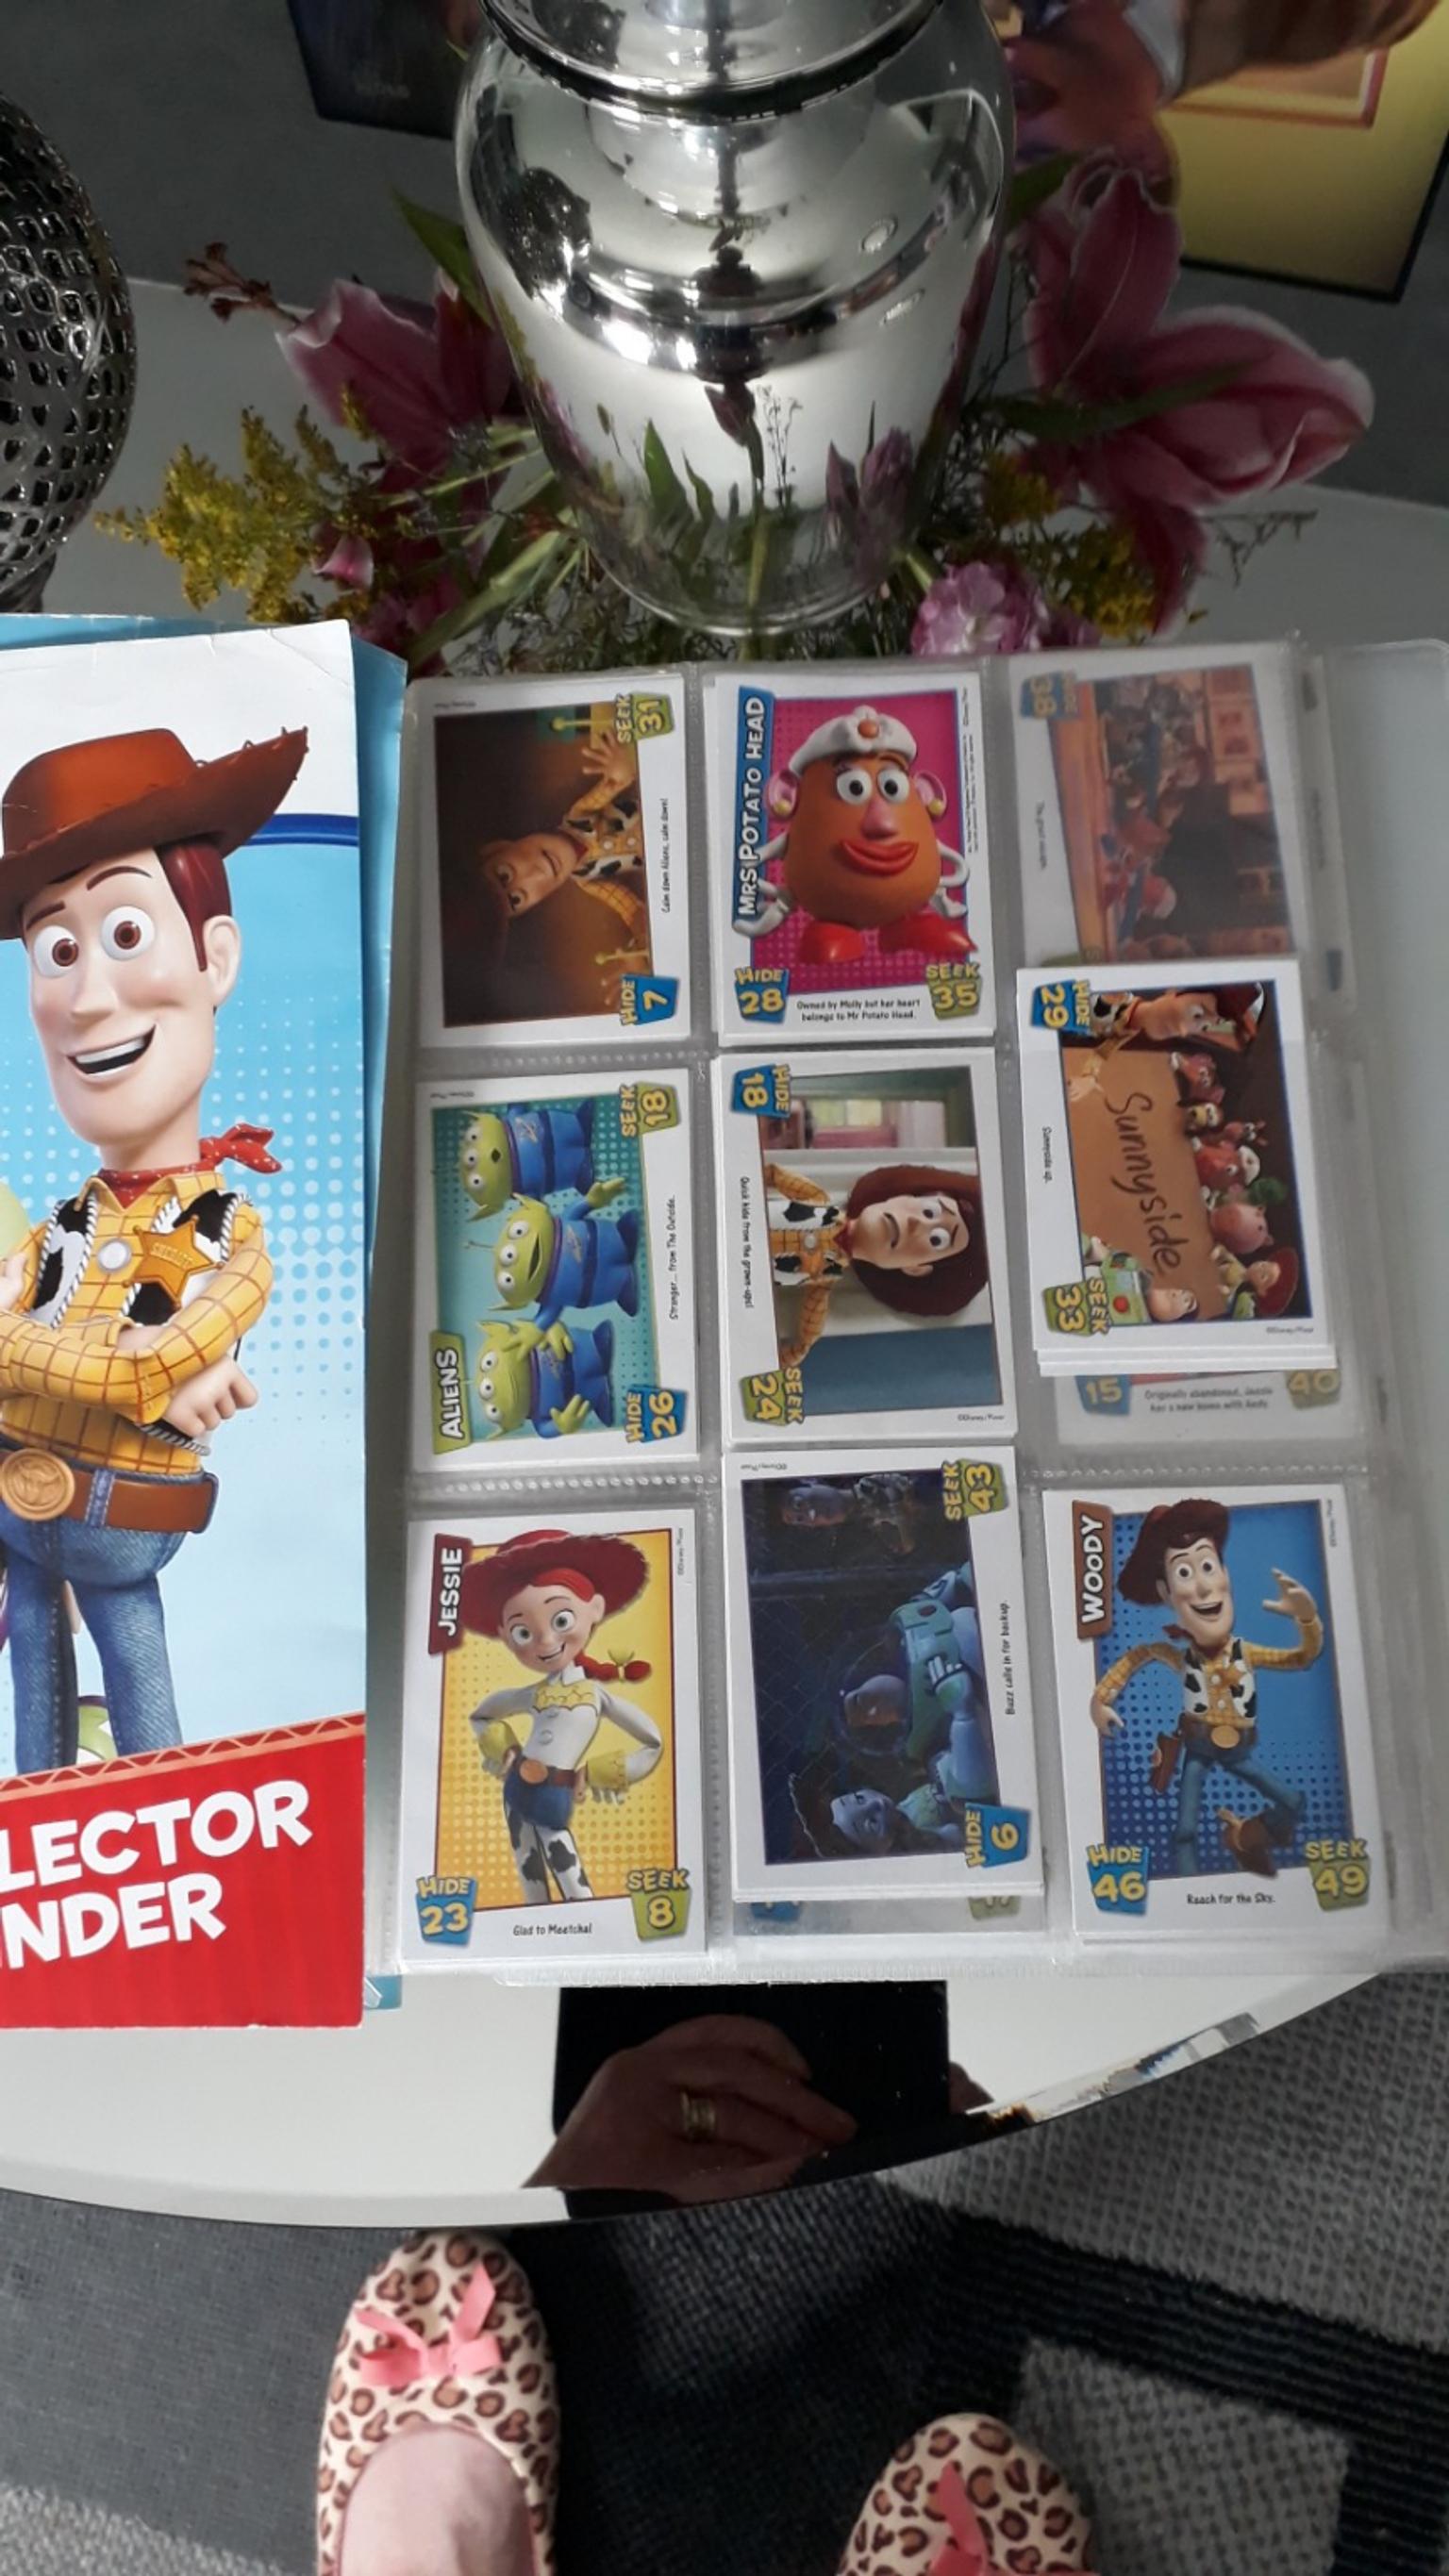 toy-story-cards-in-wv10-wolverhampton-for-2-00-for-sale-shpock